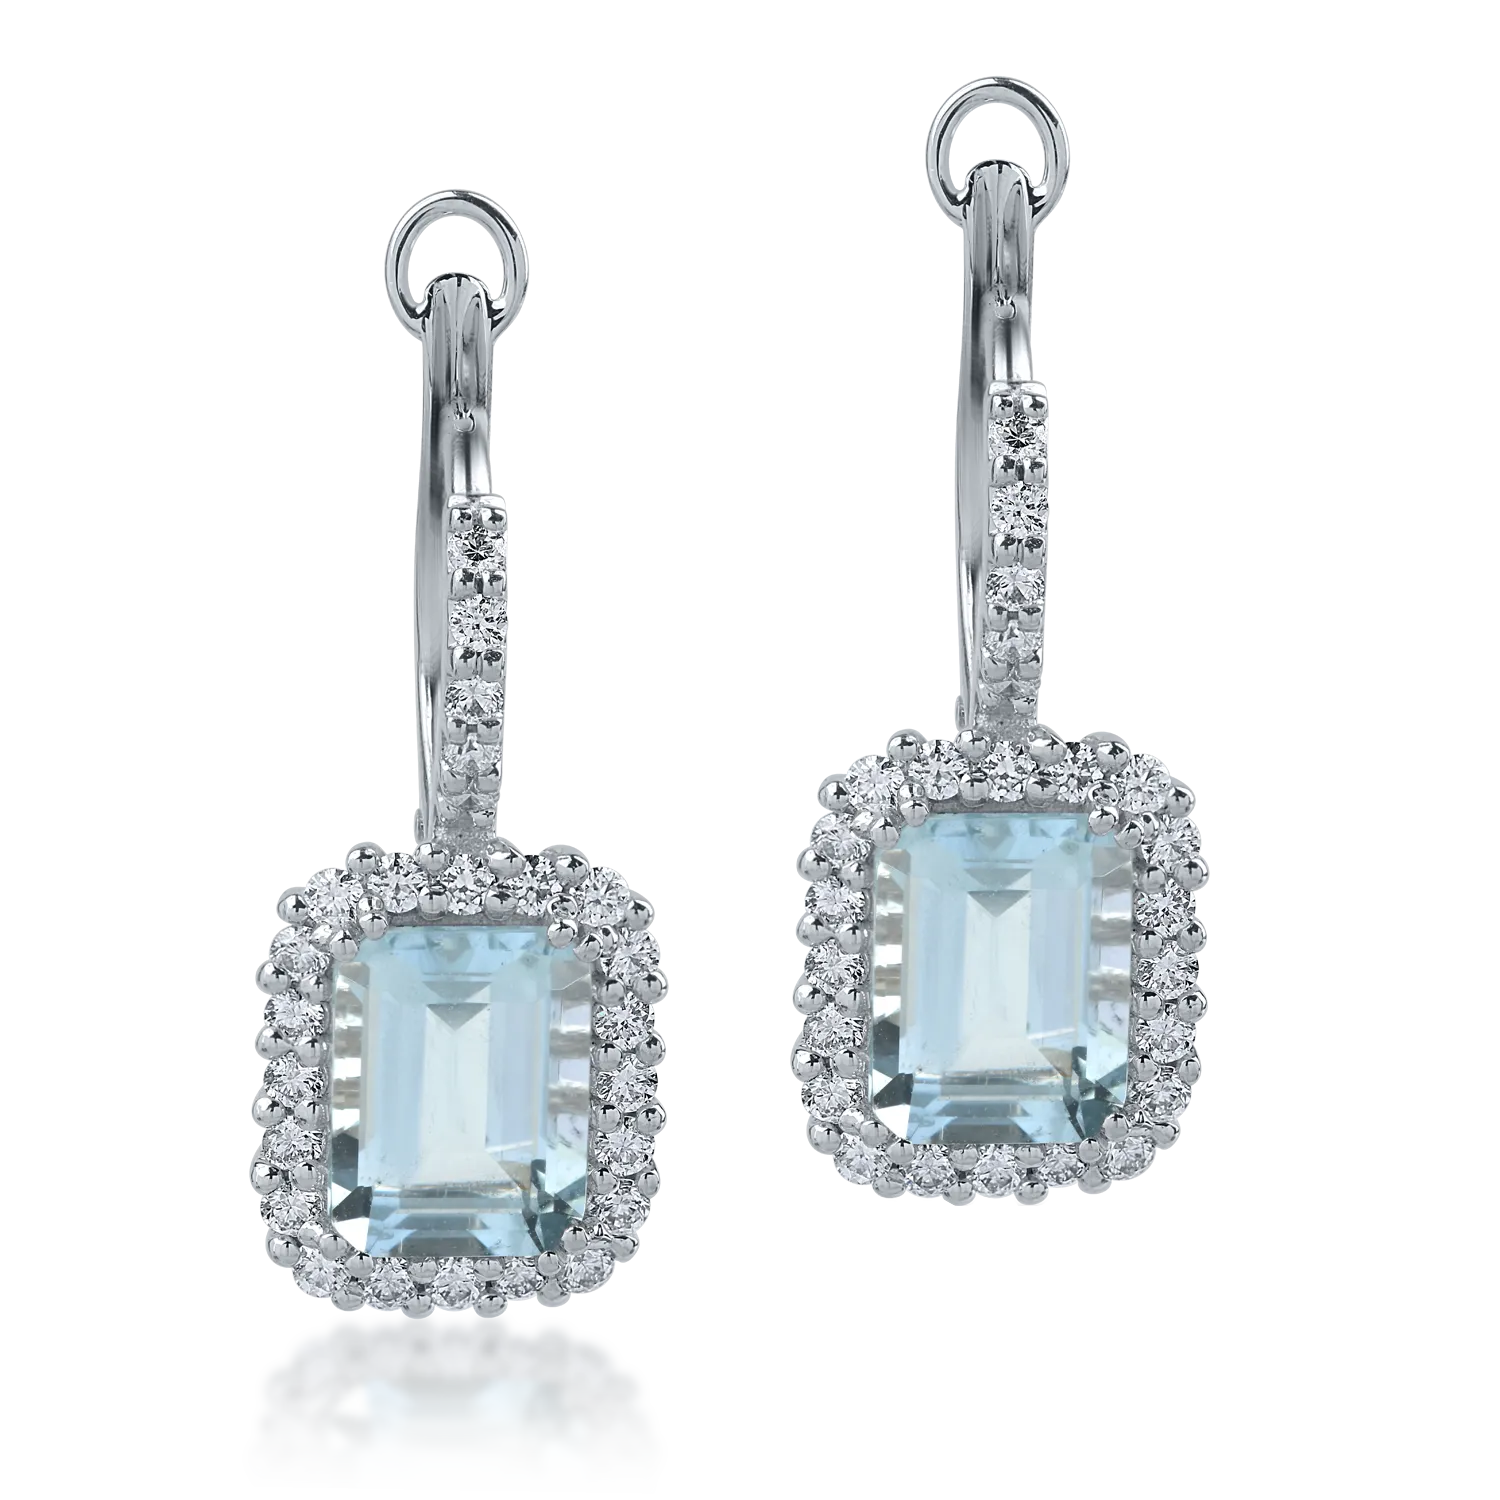 White gold earrings with 2.72ct aquamarines and 0.54ct diamonds